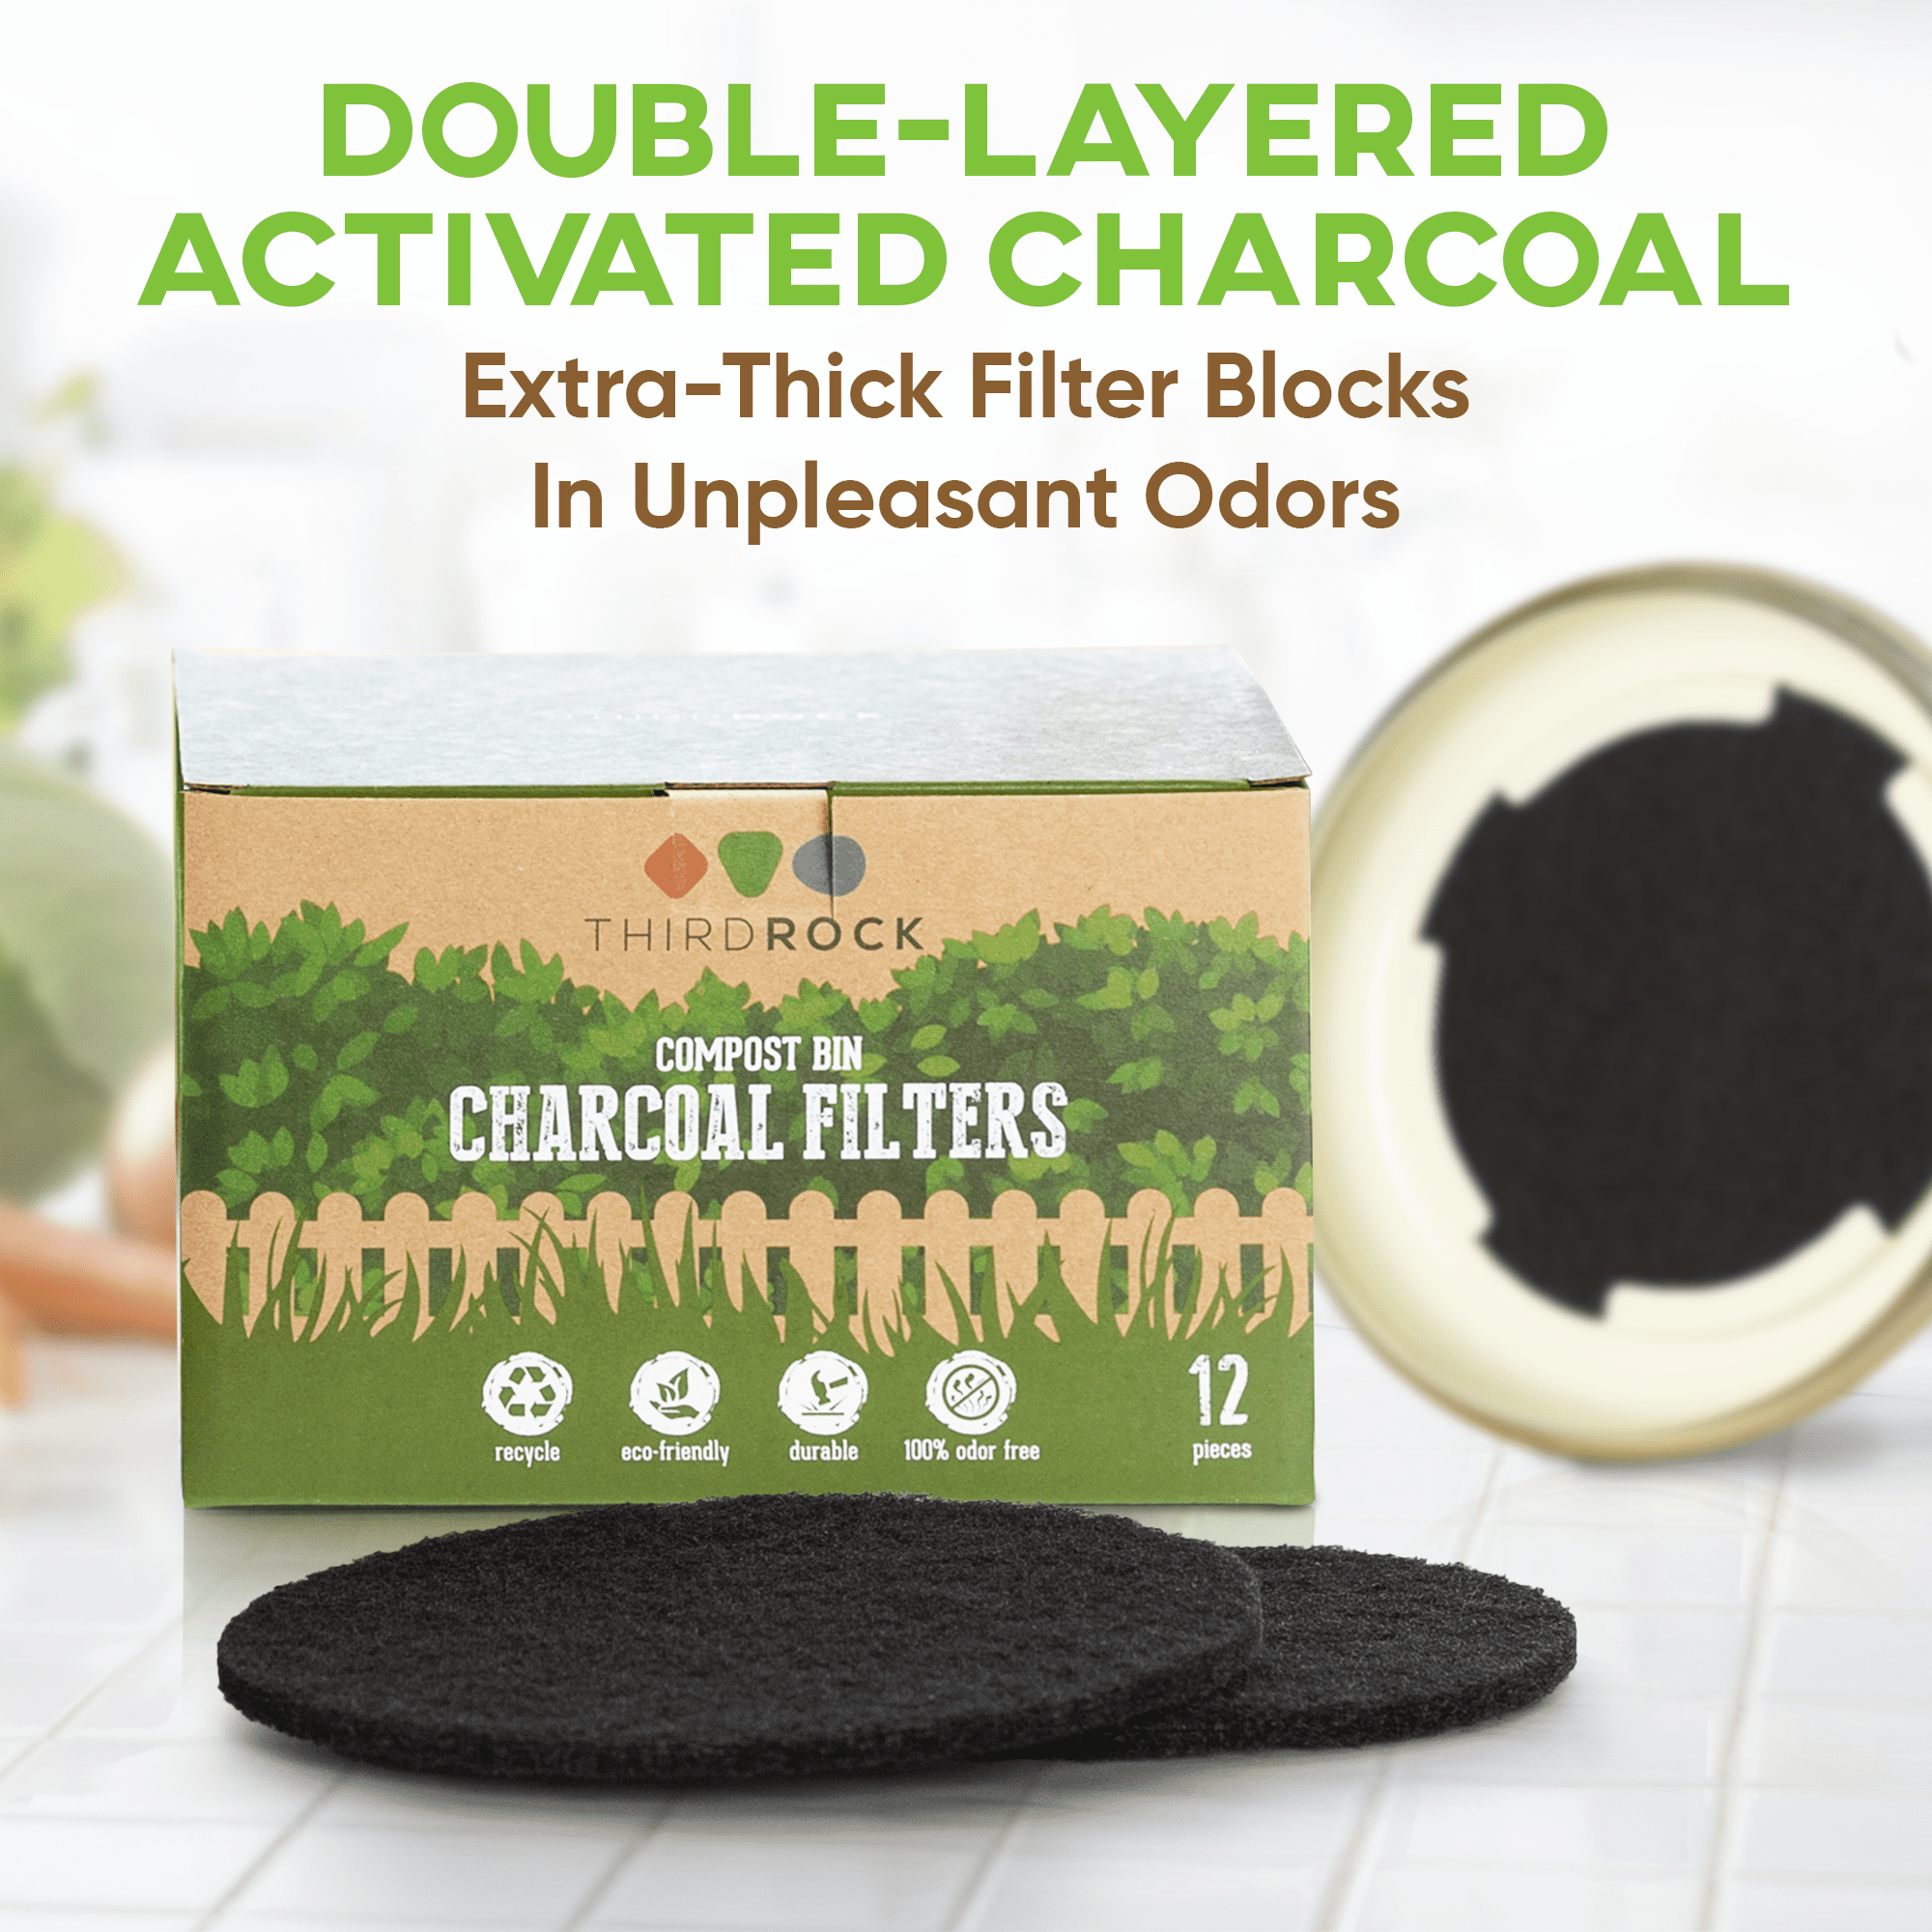 Compost Bin Kitchen Charcoal Filter 12 Pack, Extra Thick Charcoal Filters  for Kitchen Compost Bins, Replacement Compost Filters for Countertop Bin